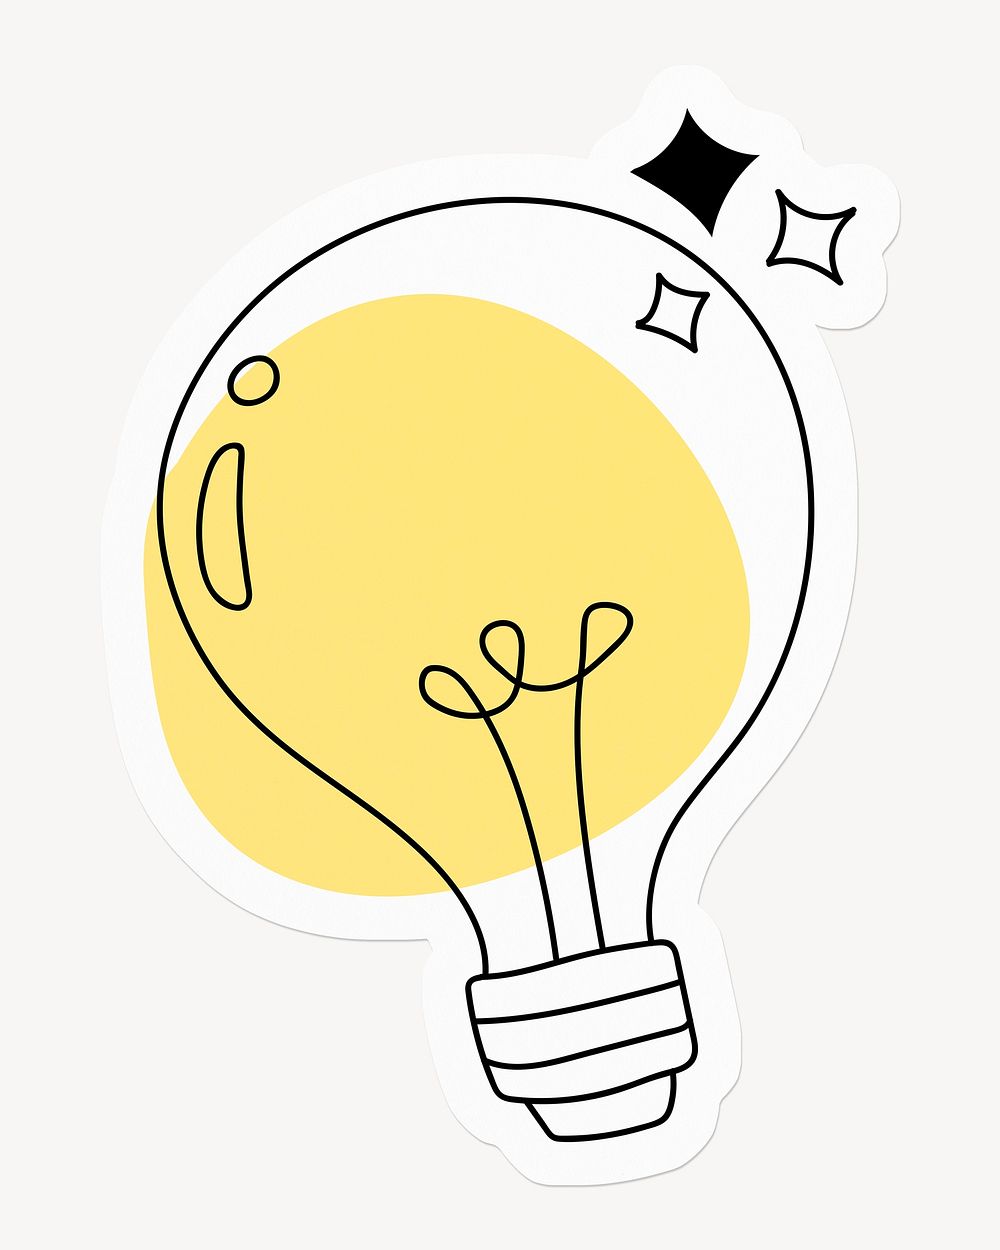 Glowing light bulb doodle, drawing illustration